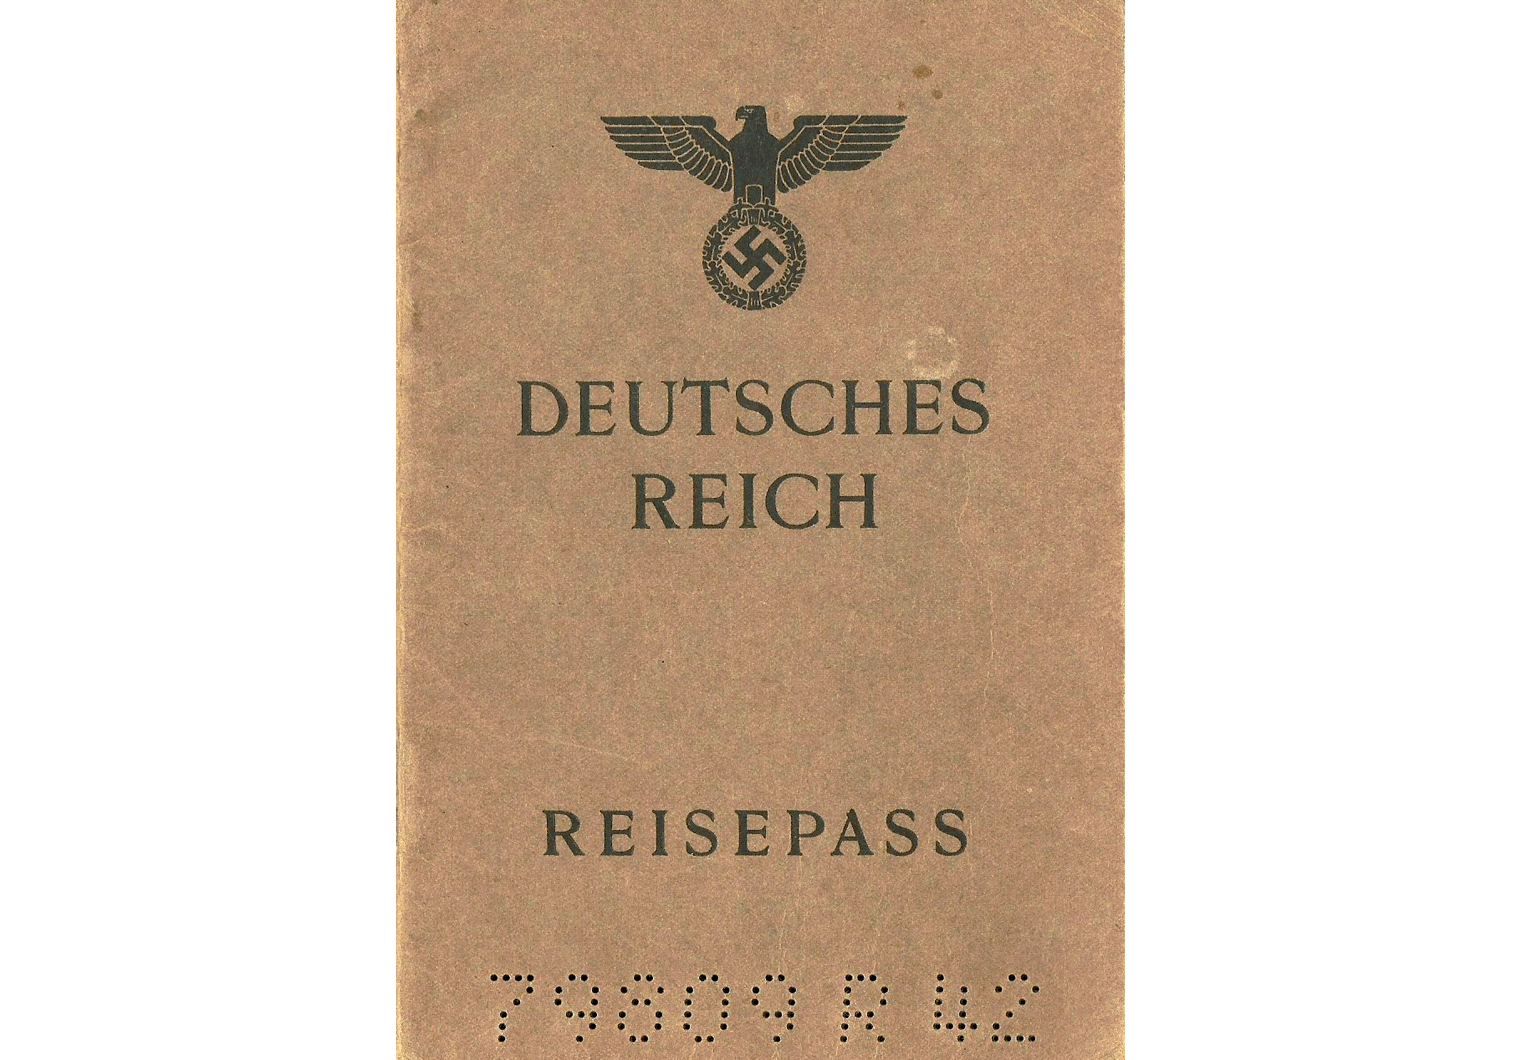 Passport issued after Hitler’s death